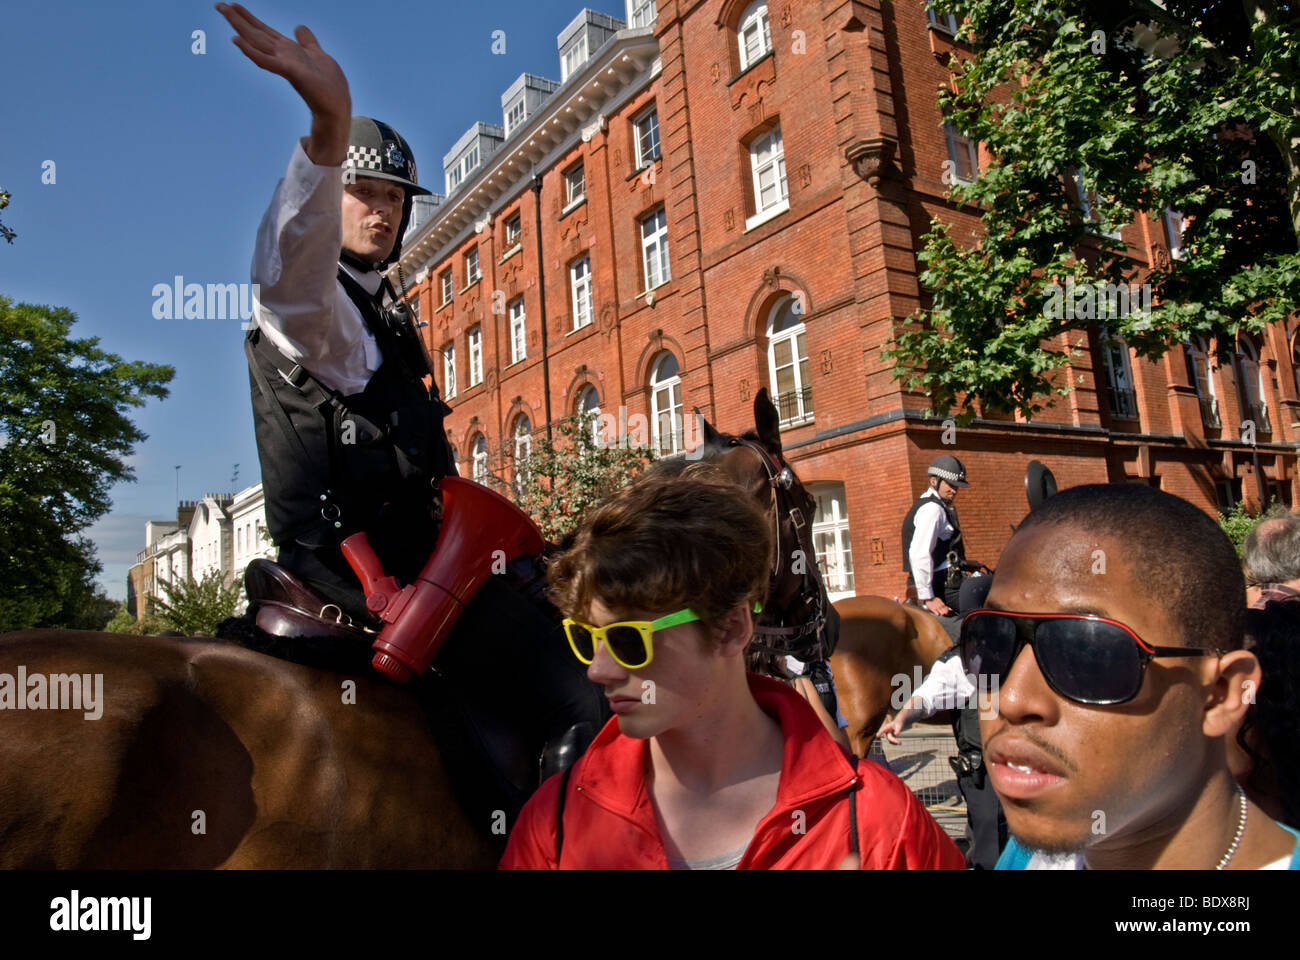 MOUNTED POLICEMAN GIVES DIRECTION TO THE CROWD DURING THE NOTTING HILL CARNAVAL 2009 Stock Photo